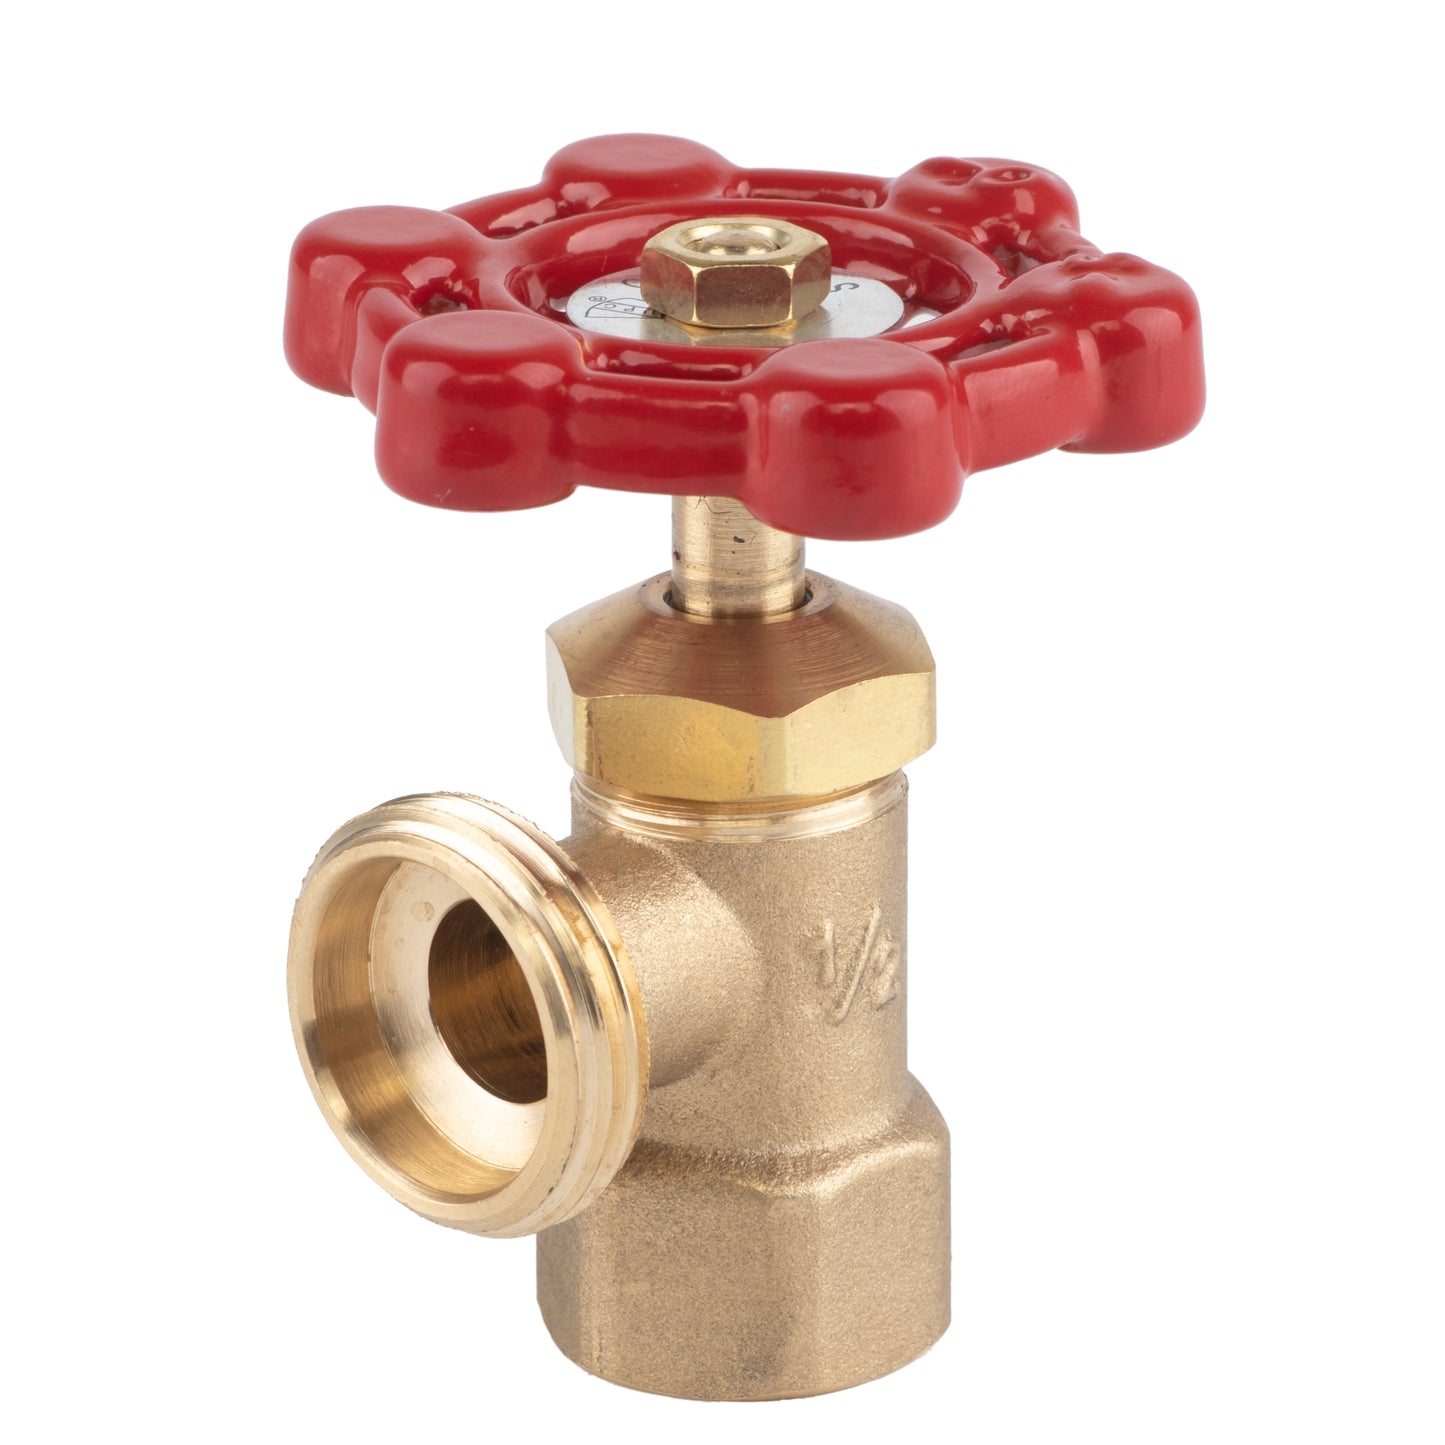 Hausen 1/2-inch FIP (Female Iron Pipe) x 3/4-inch MHT (Male Hose Thread) Brass Boiler Drain Valve; cUPC Certified; Compatible with Boilers and Water Heaters in Plumbing and Heating Systems, 5-pack